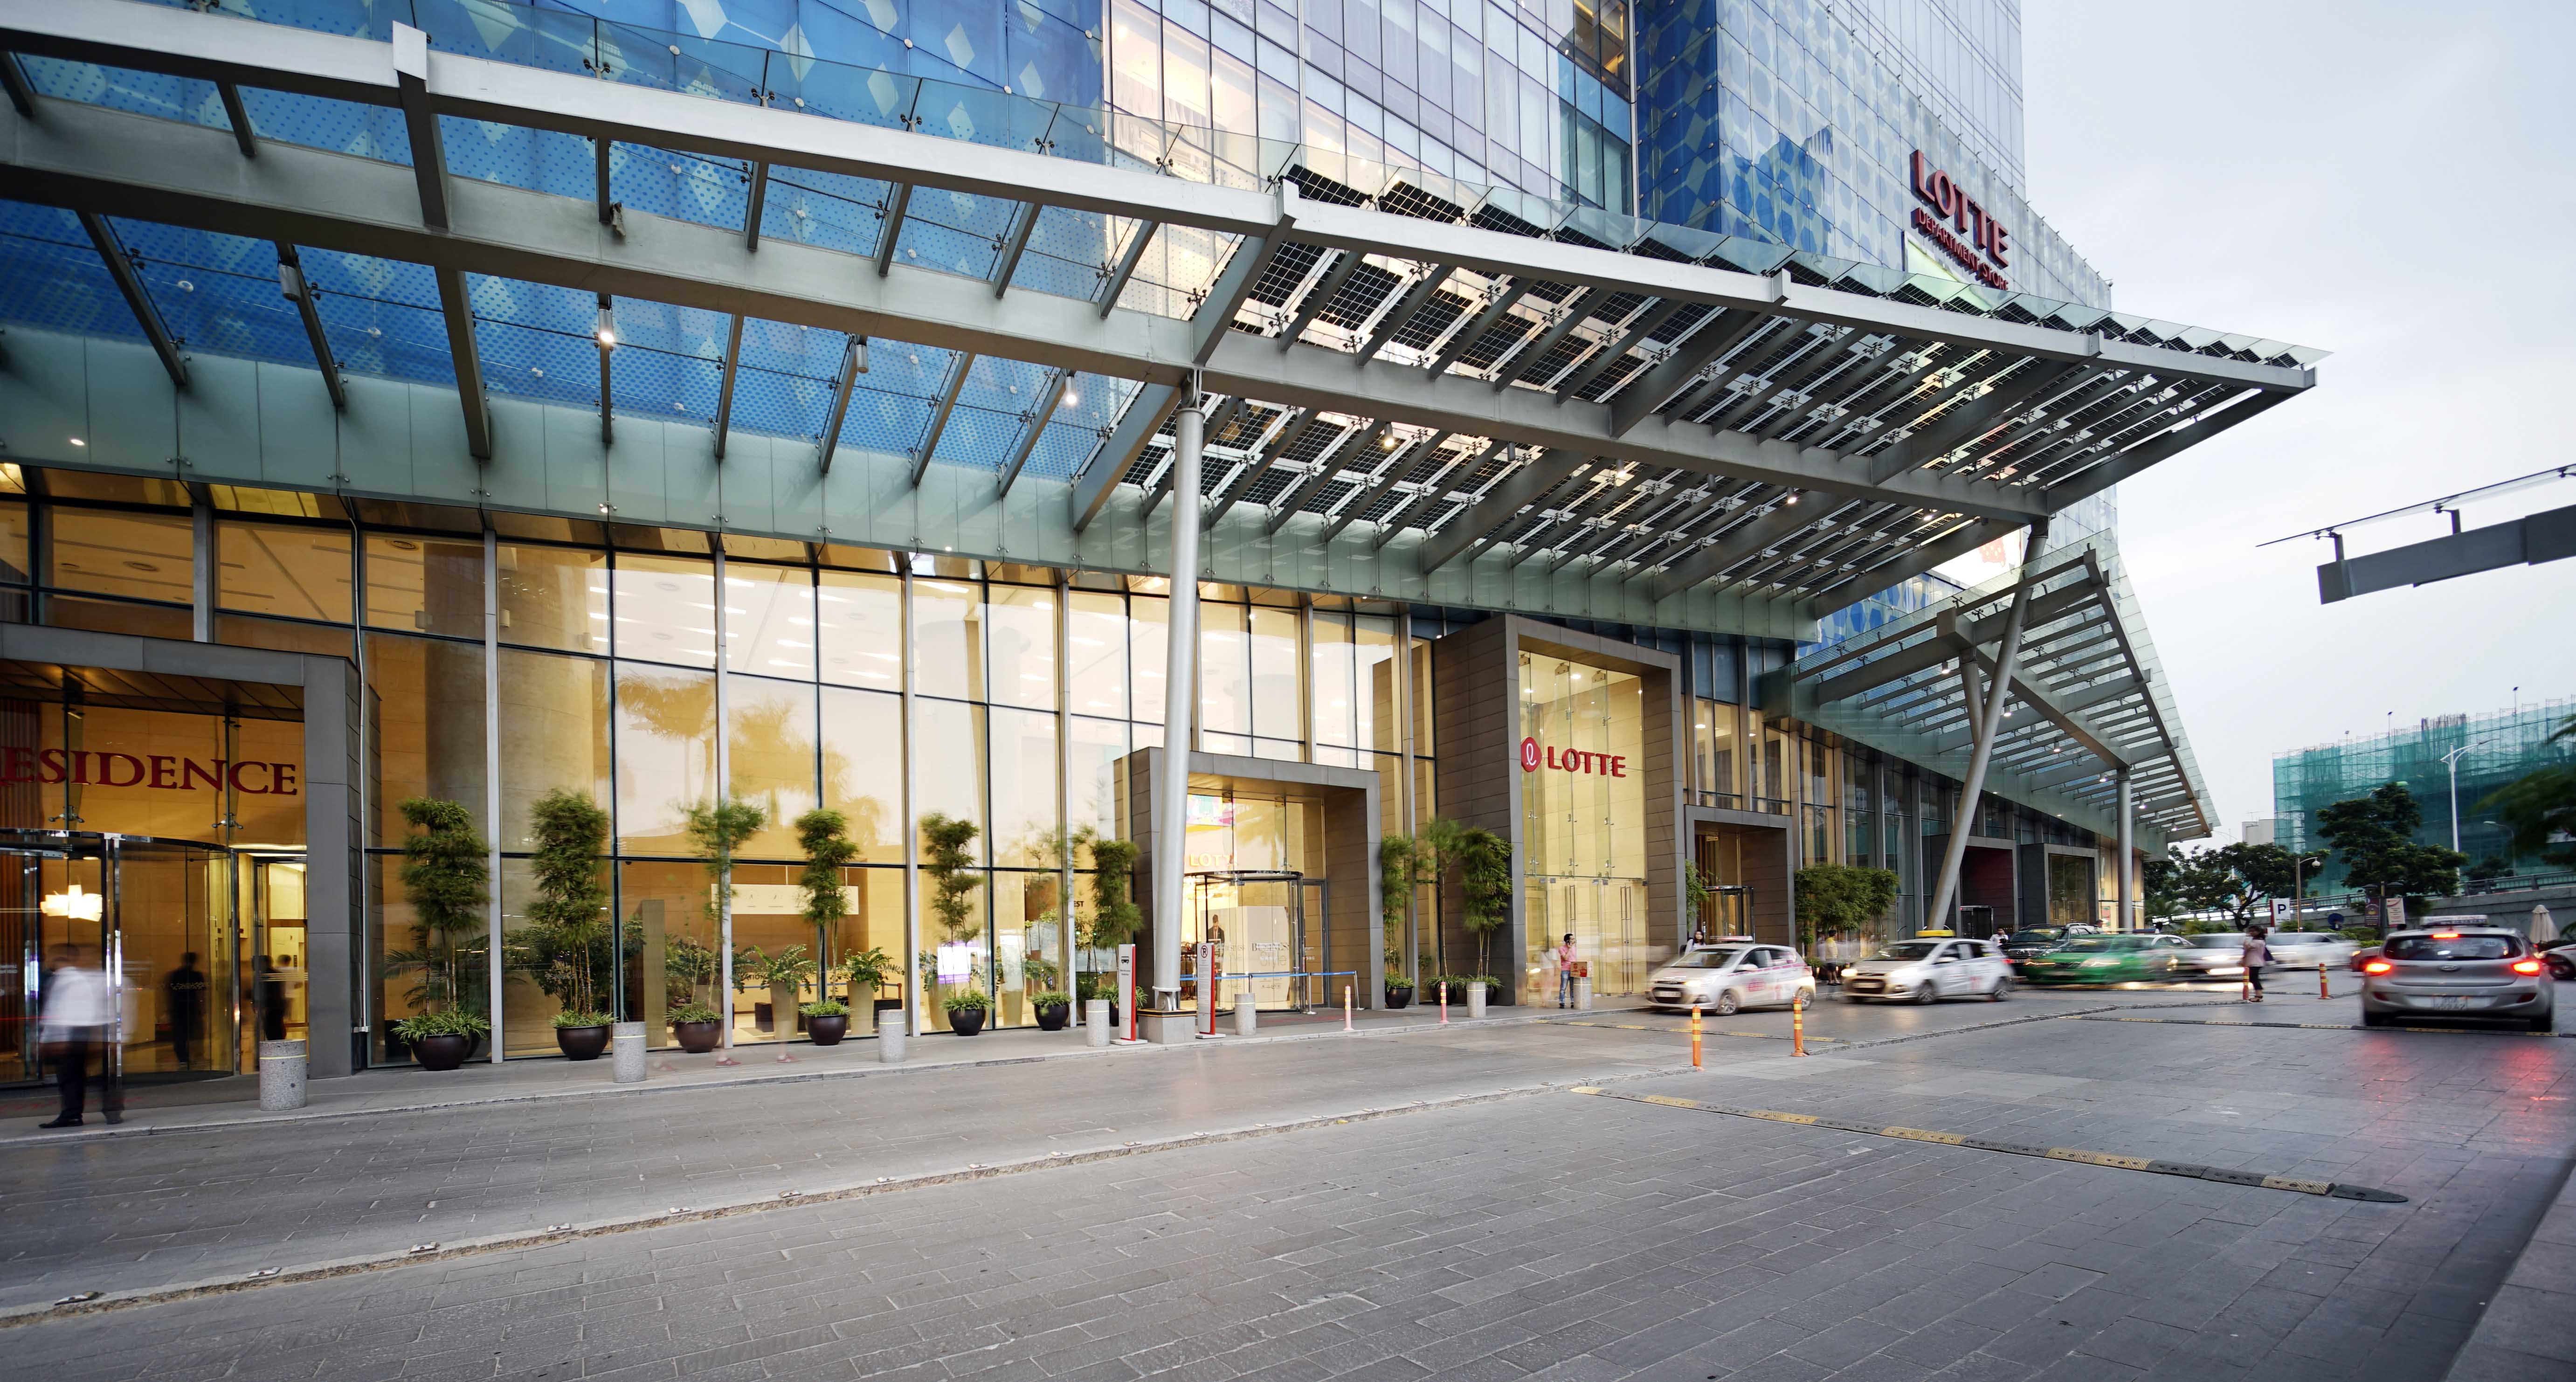 Lotte Center Hanoi is more of a department store rather than a shopping mall